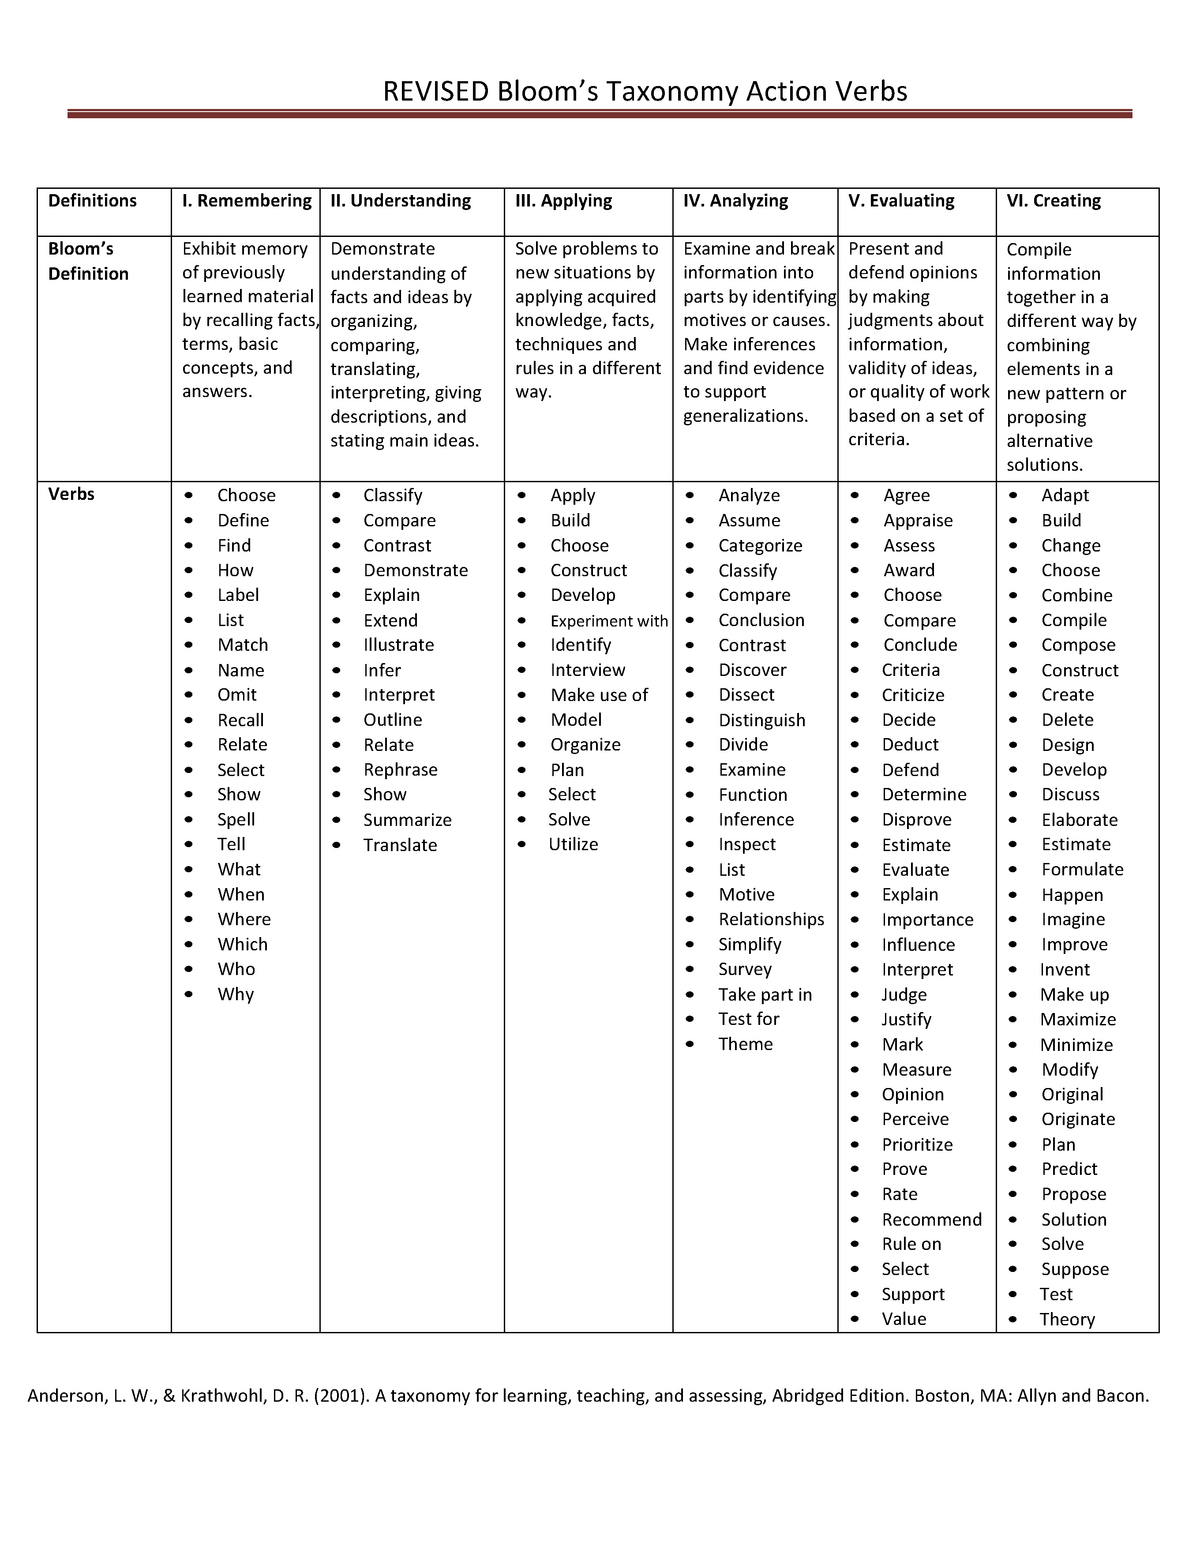 blooms-taxonomy-verbs-revised-bloom-s-taxonomy-action-verbs